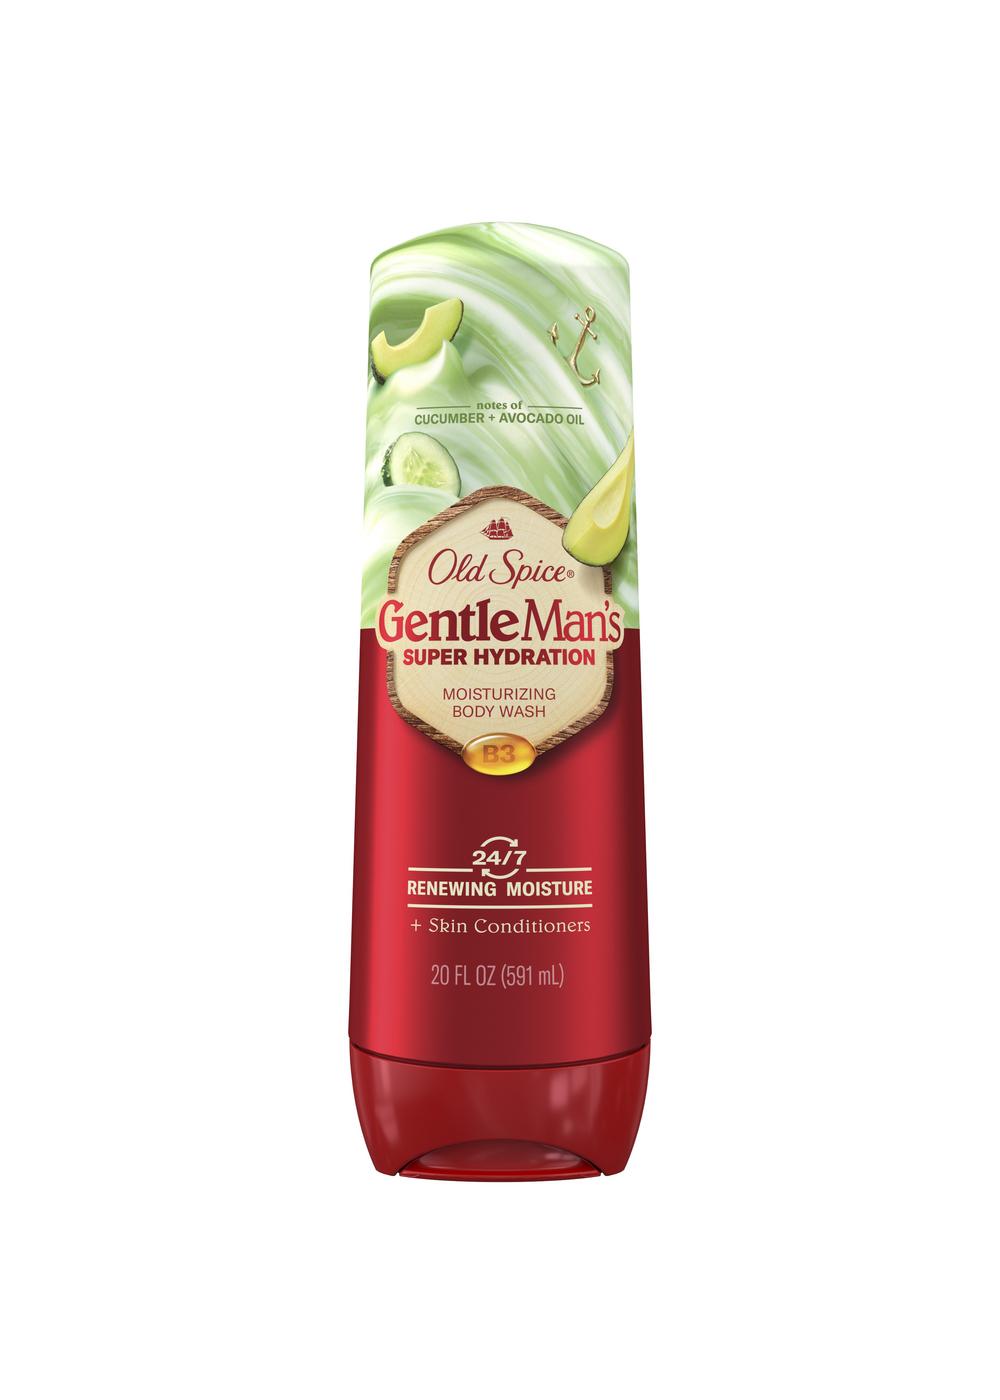 Old Spice GentleMan's Body Wash Cucumber + Avocado Oil; image 1 of 2